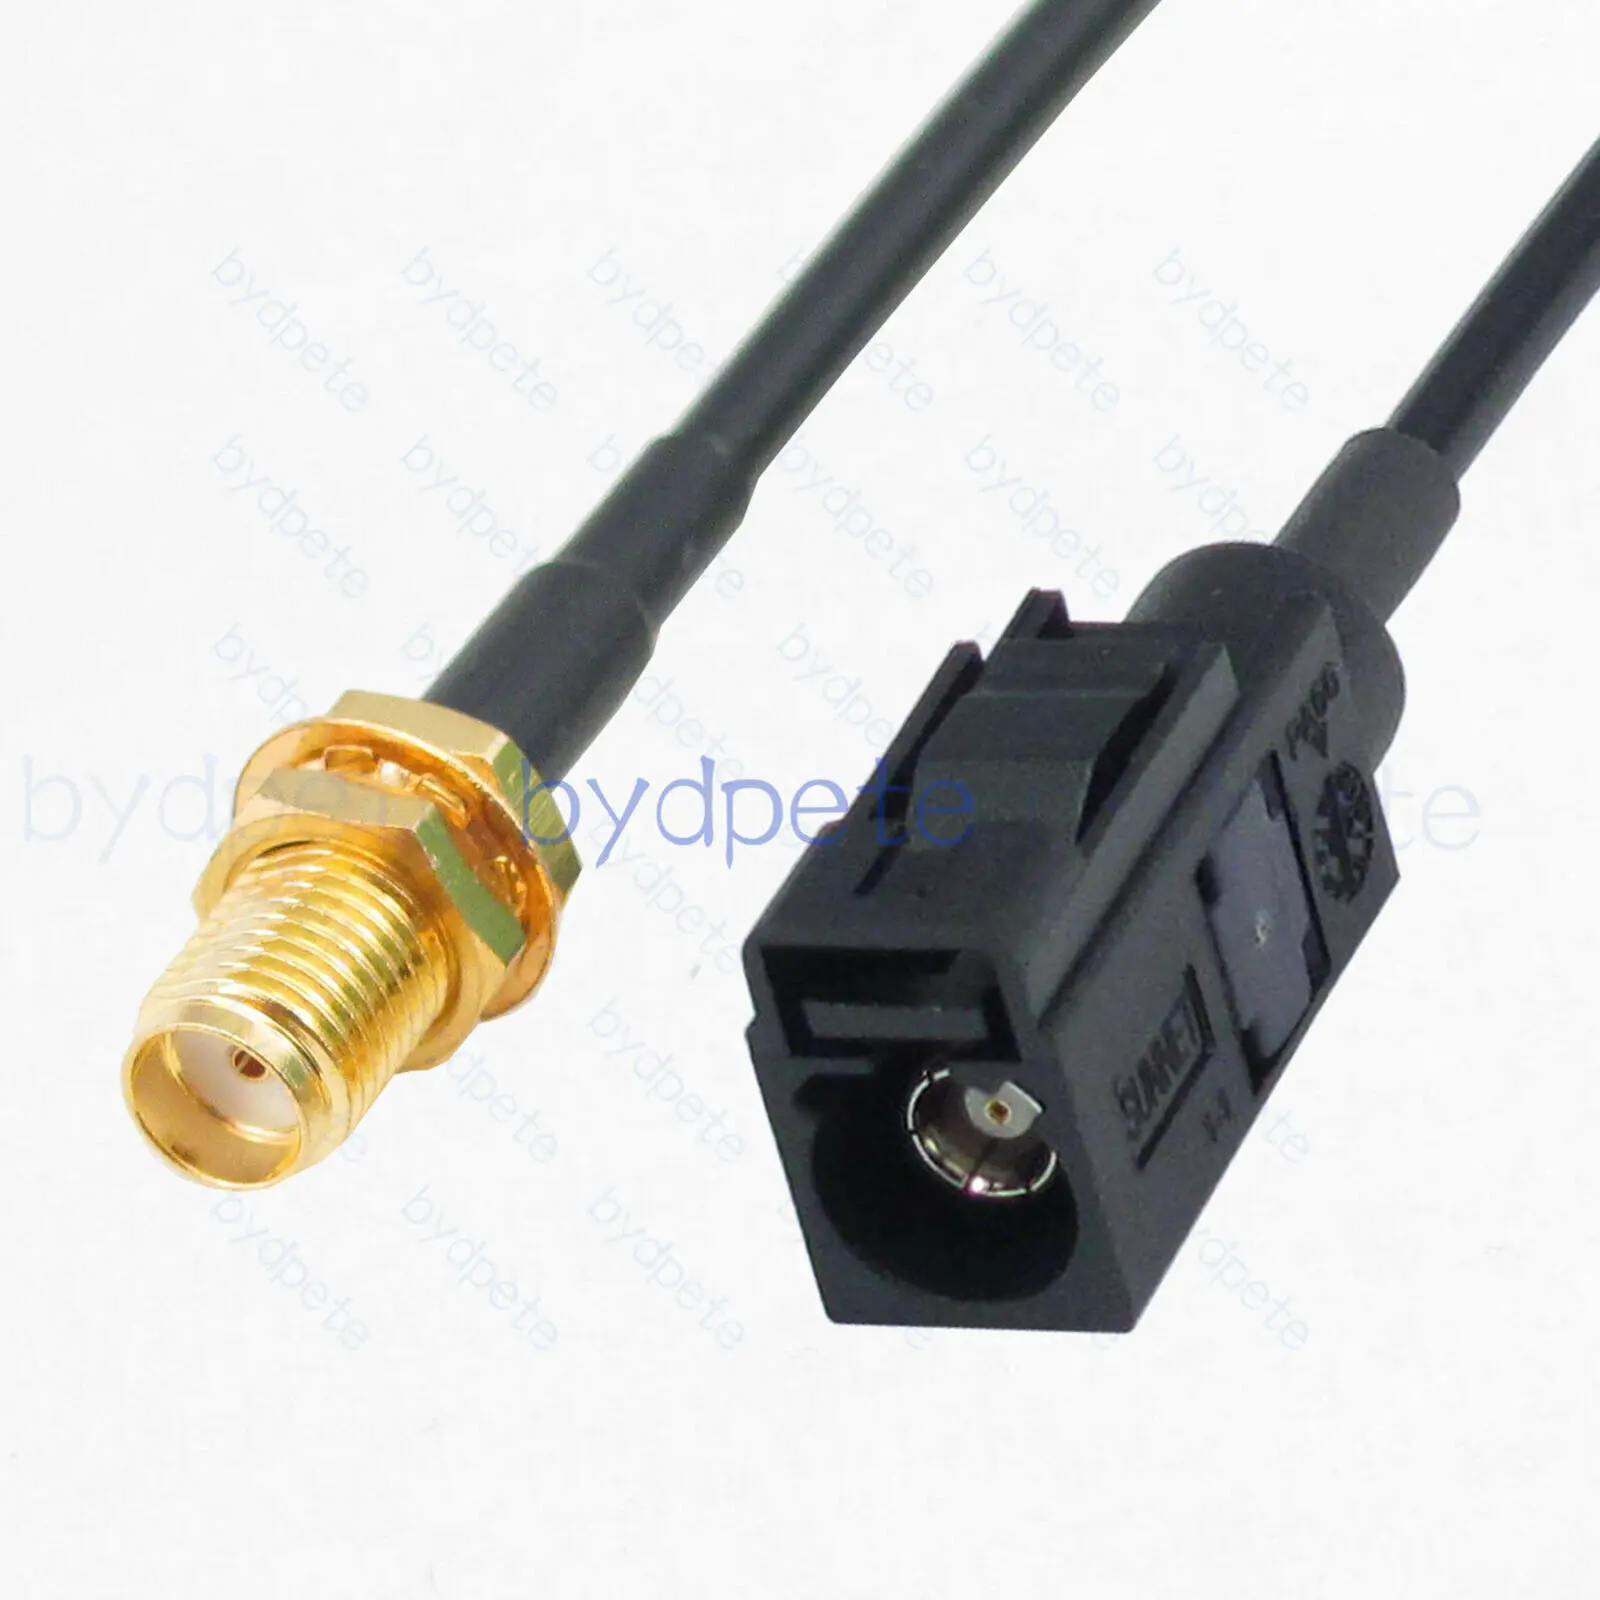 Купи Fakra-A to SMA female Black 9005 RG174 cable For Car GPS Antenna Wire WIFI Coax Jumper Pigtail Antenna Extension RF Coaxial за 239 рублей в магазине AliExpress